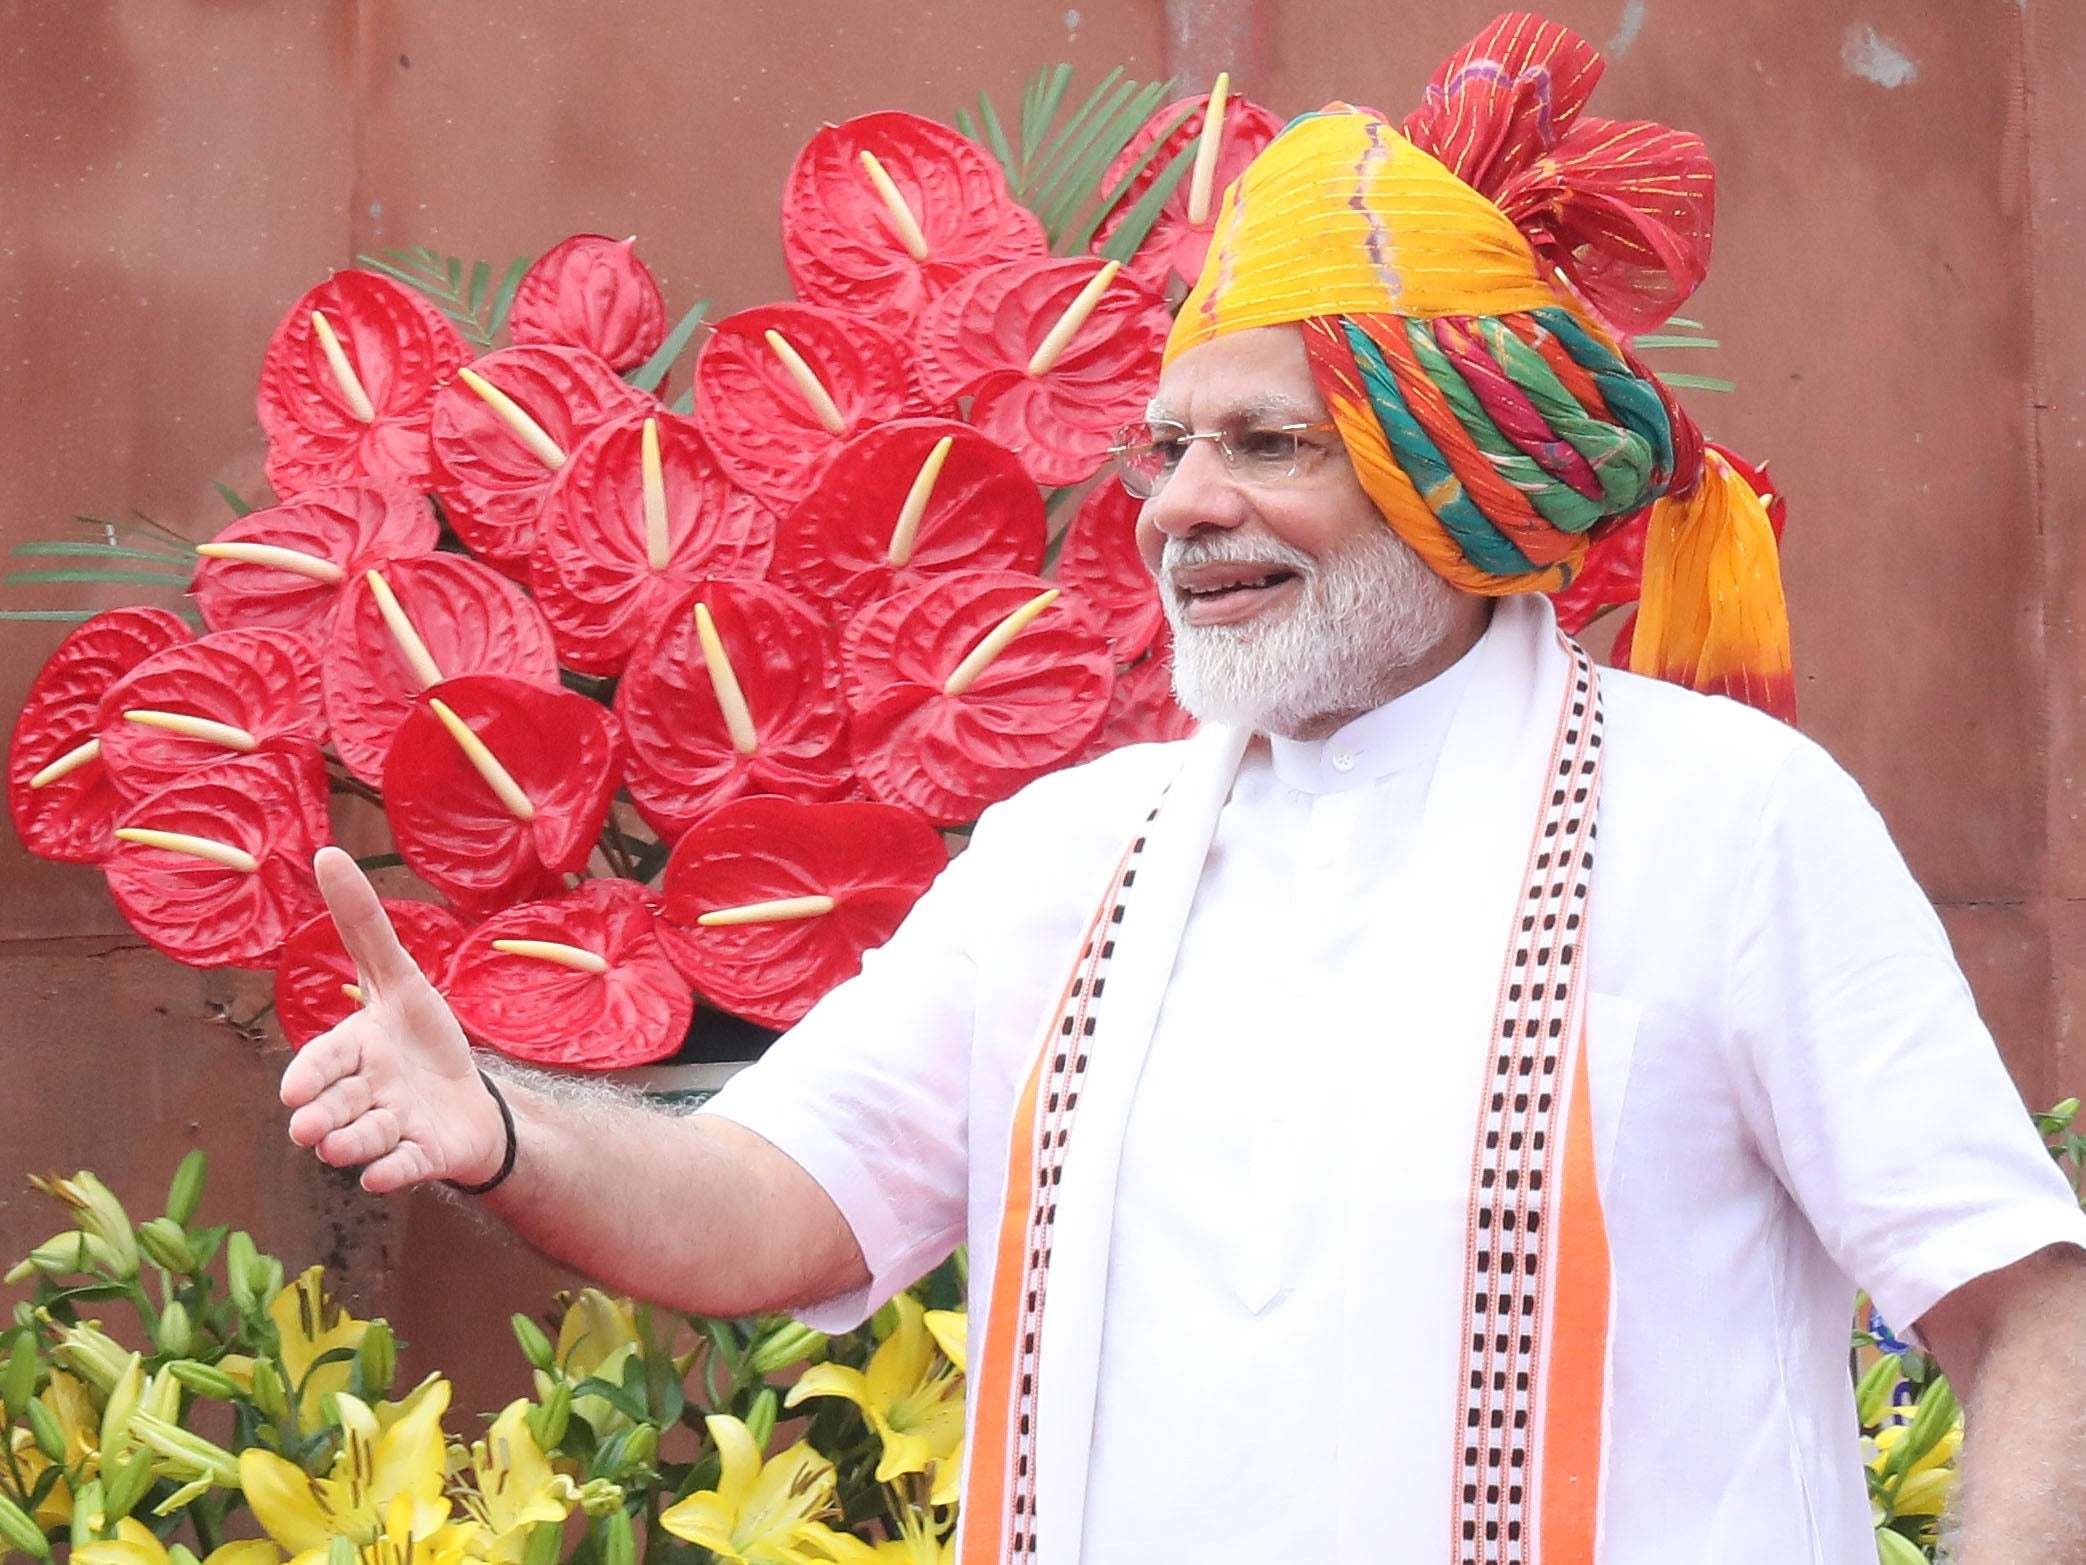 Narendra Modi greets officials and ministers (unseen) after addressing the nation at the Red Fort on Thursday